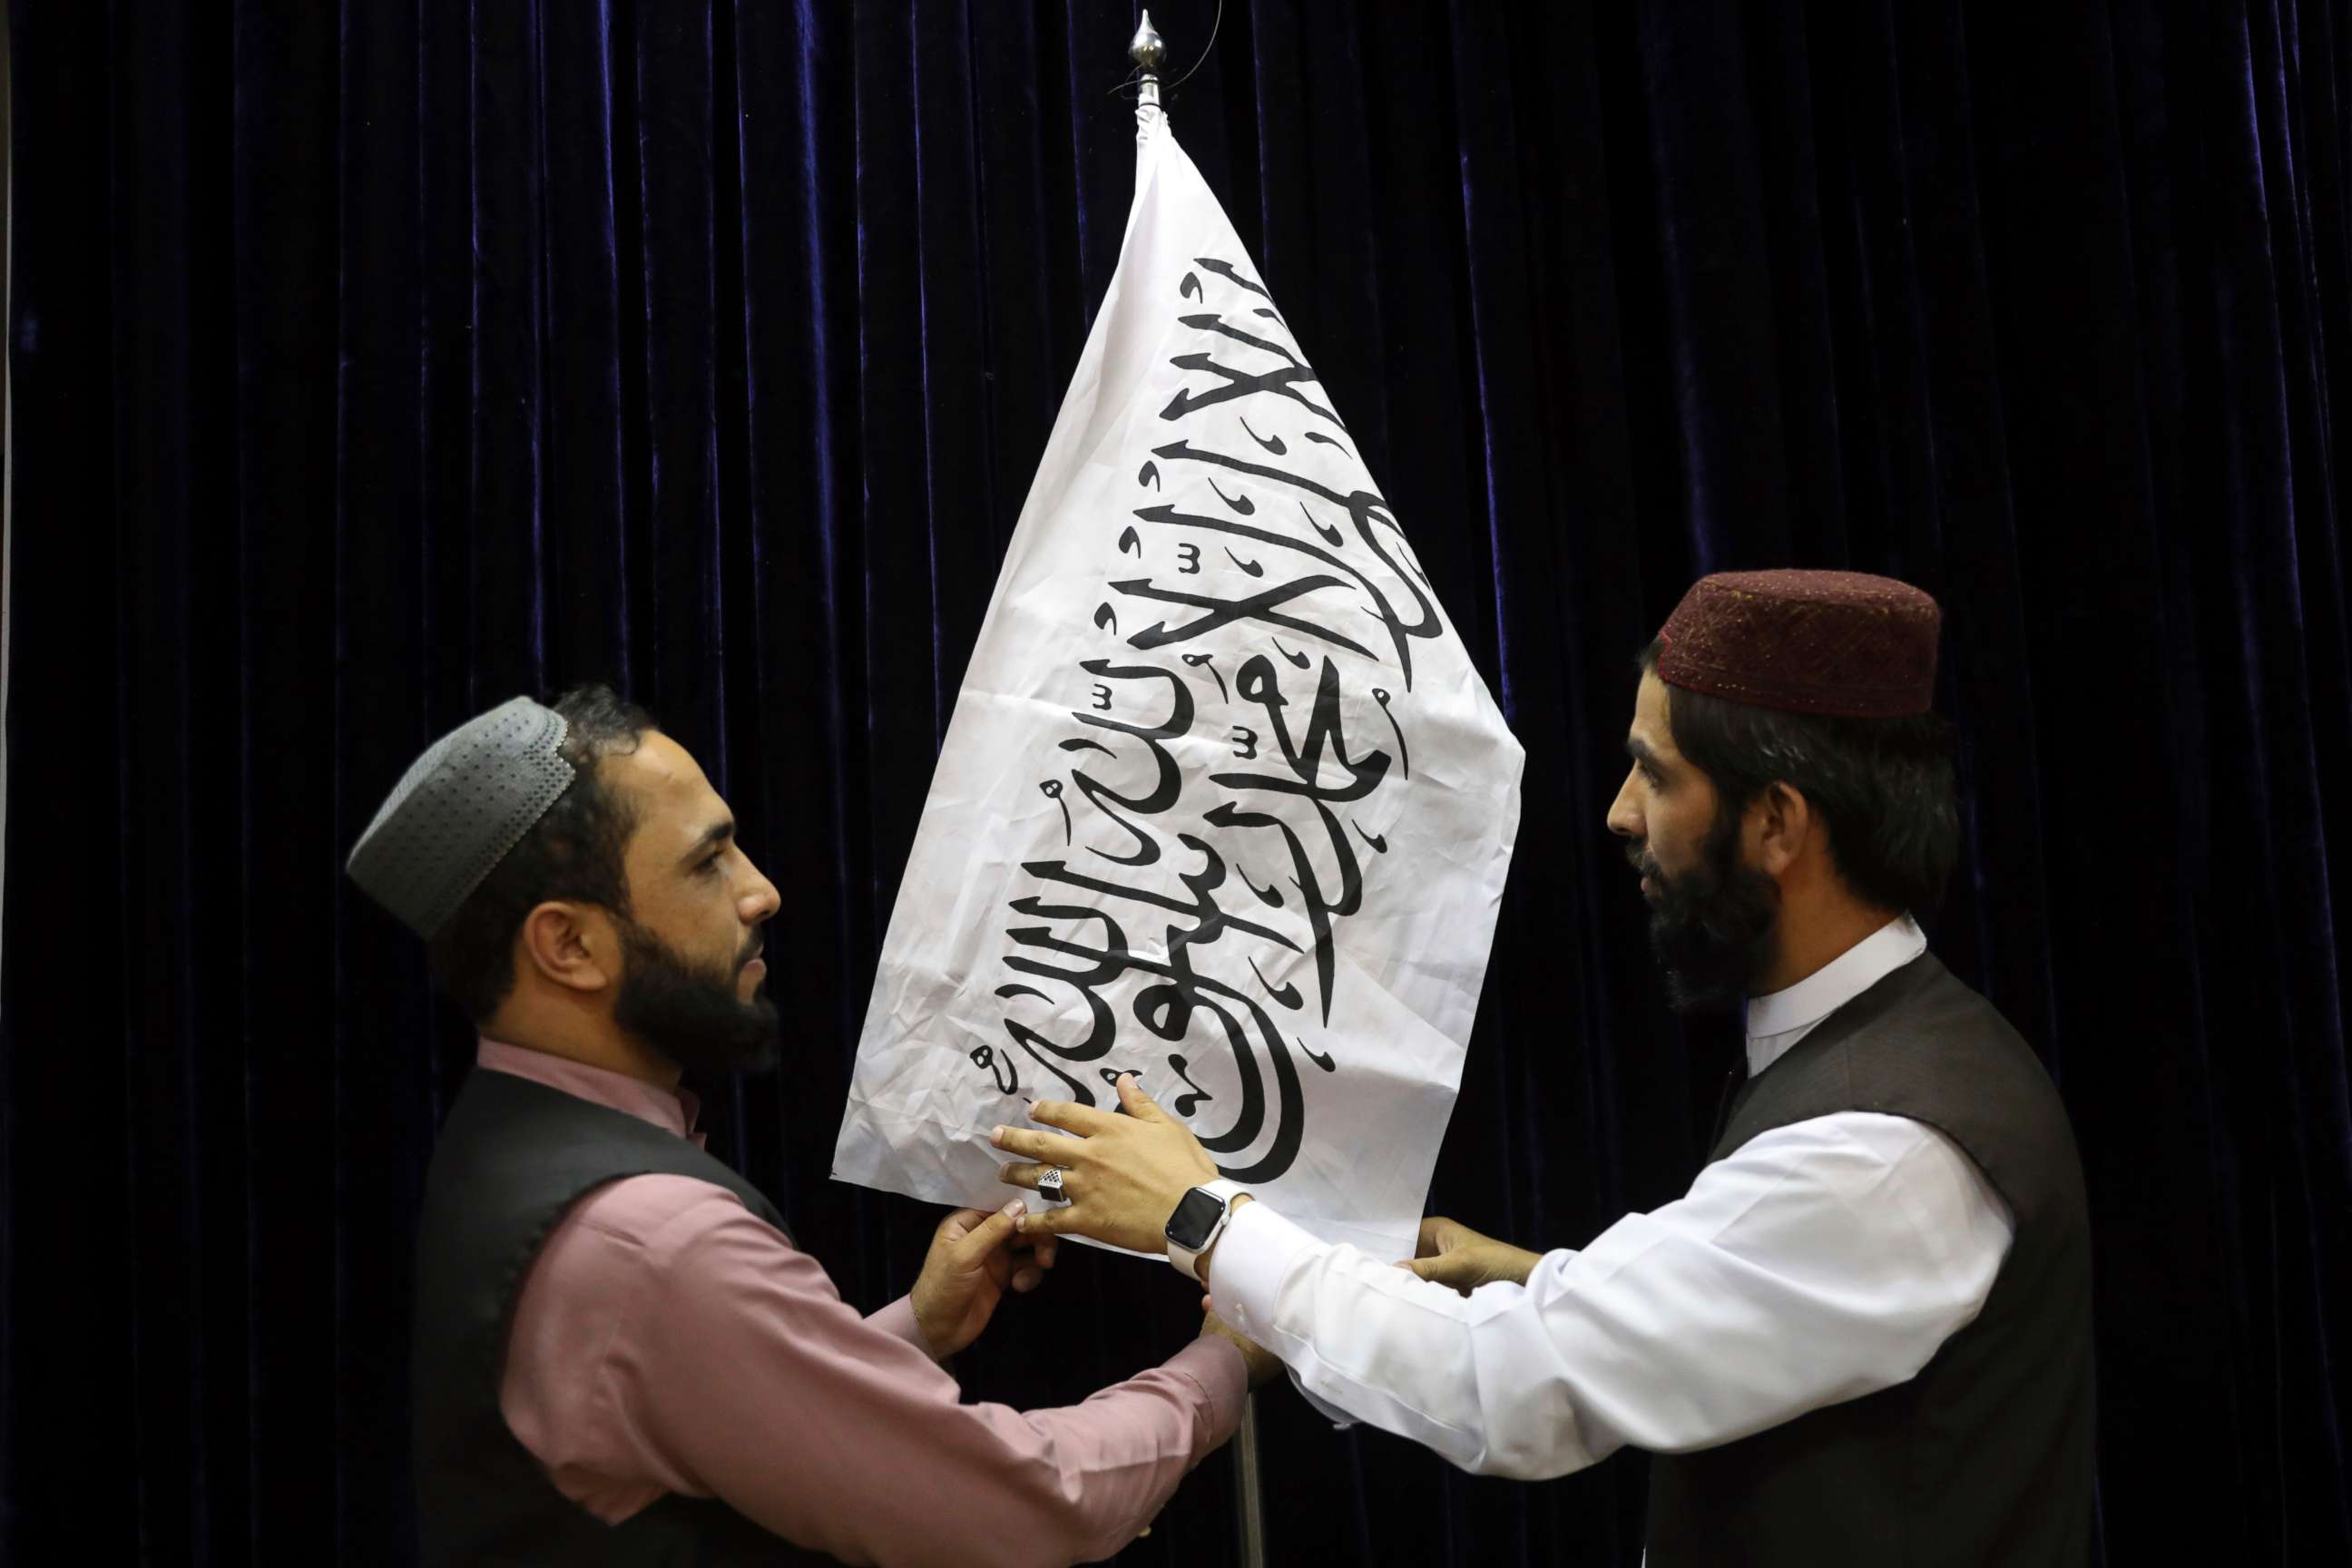 PHOTO: Taliban officials arrange a Taliban flag, before a press conference by Taliban spokesman Zabihullah Mujahid, at the Government Media Information Center, in Kabul, Afghanistan, Aug. 17, 2021.